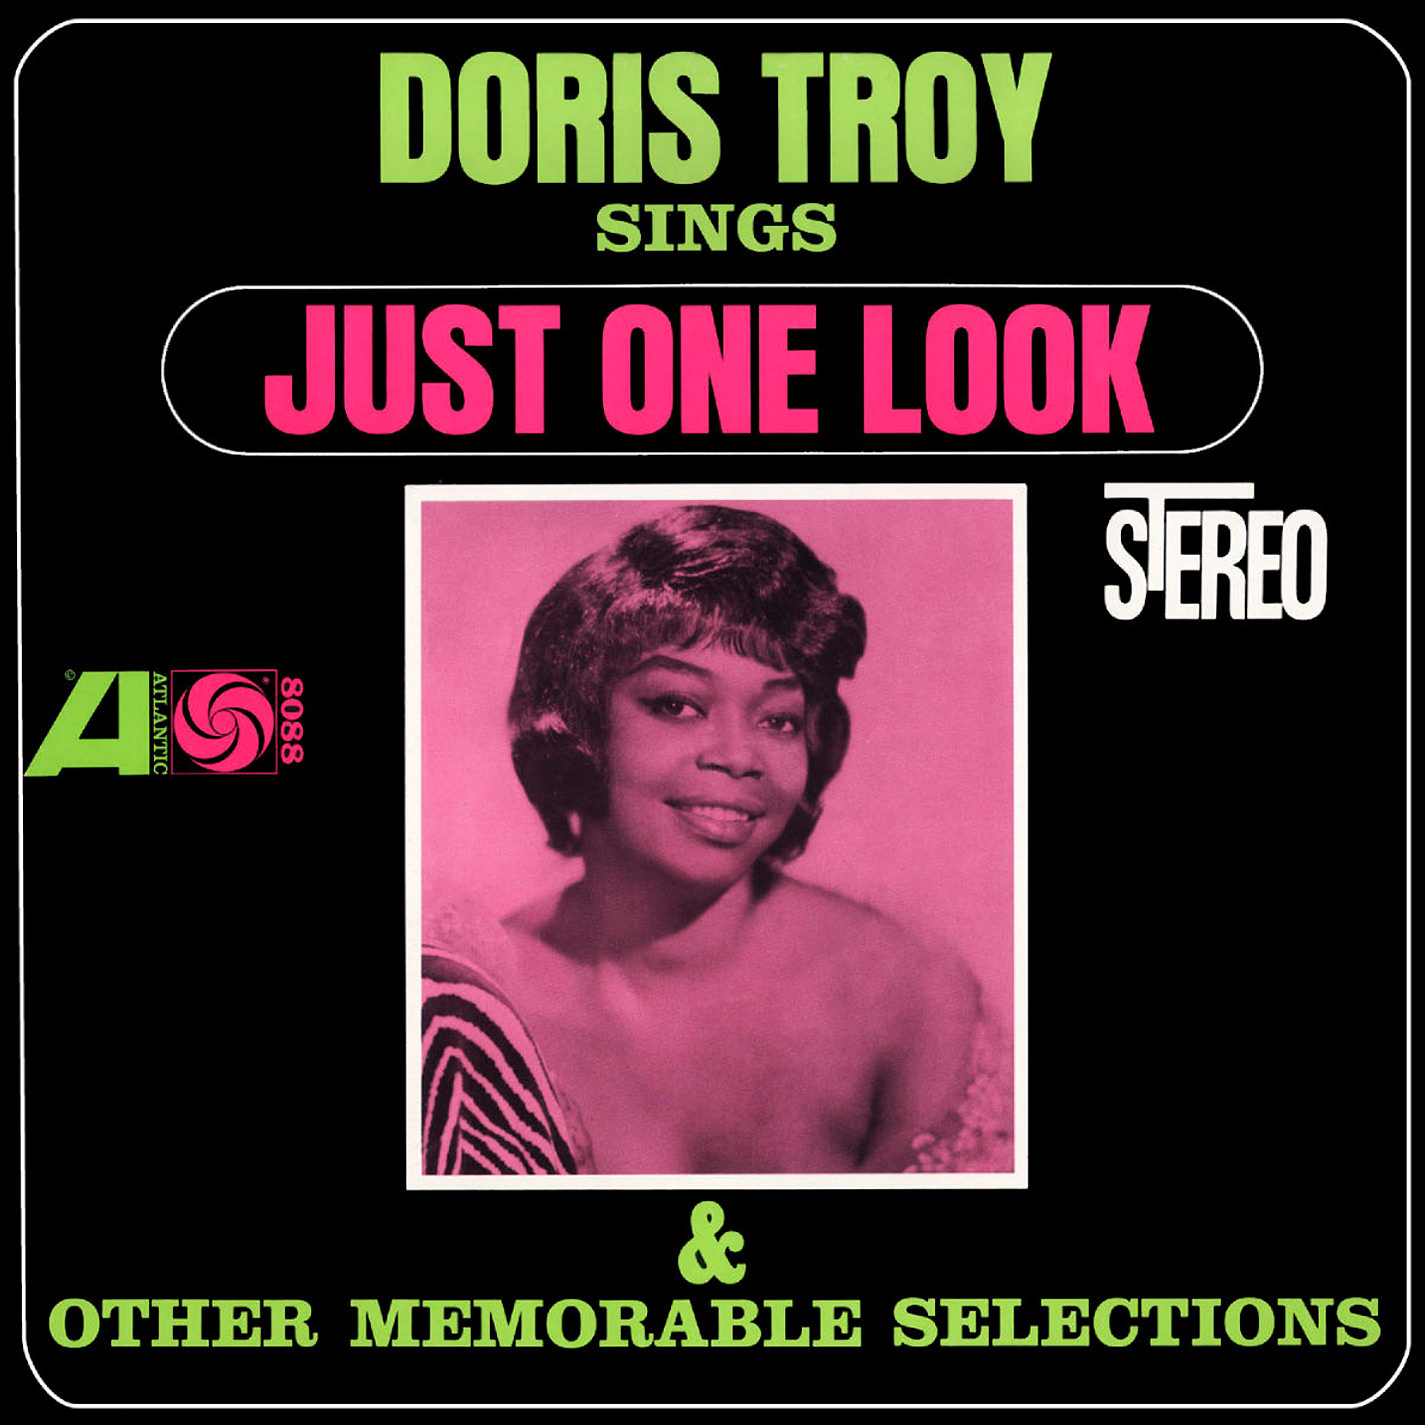 Doris Troy - Sings Just One Look And Other Memorable Selections (1963/2012) [HDTracks FLAC 24bit/96kHz]